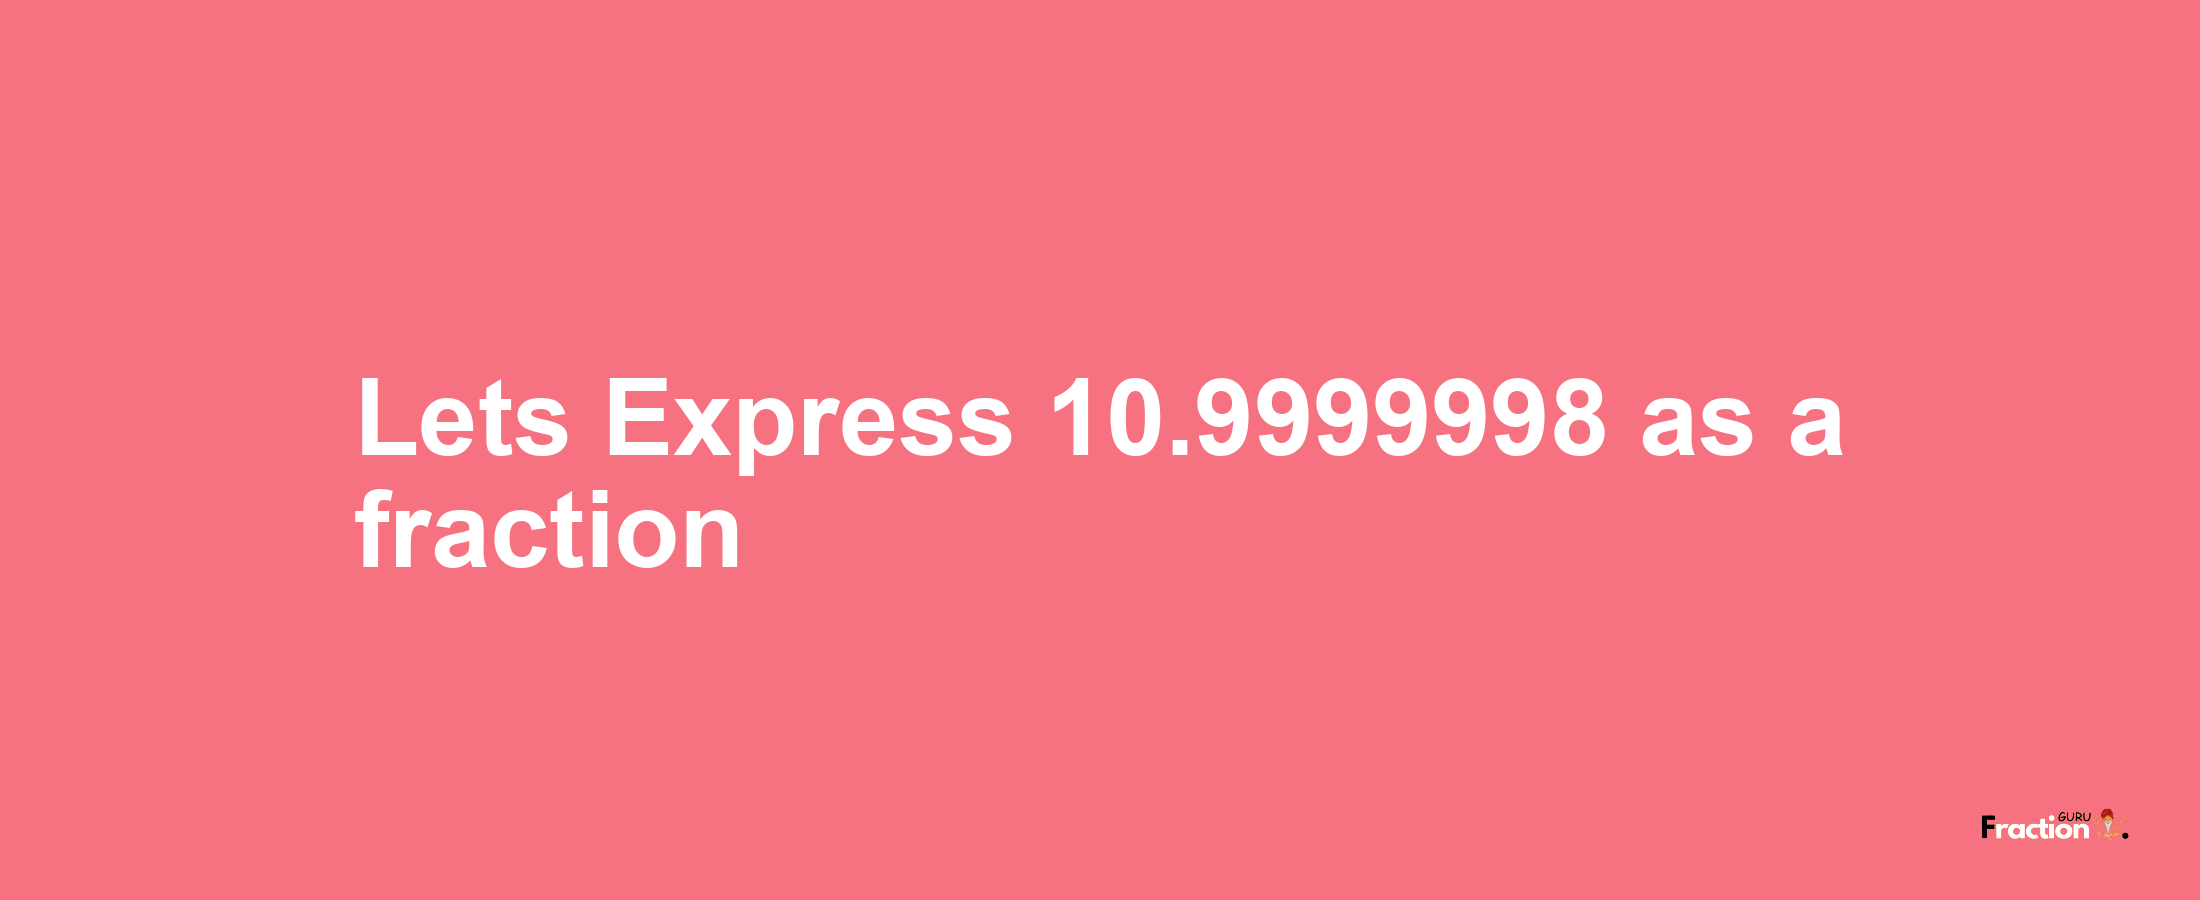 Lets Express 10.9999998 as afraction